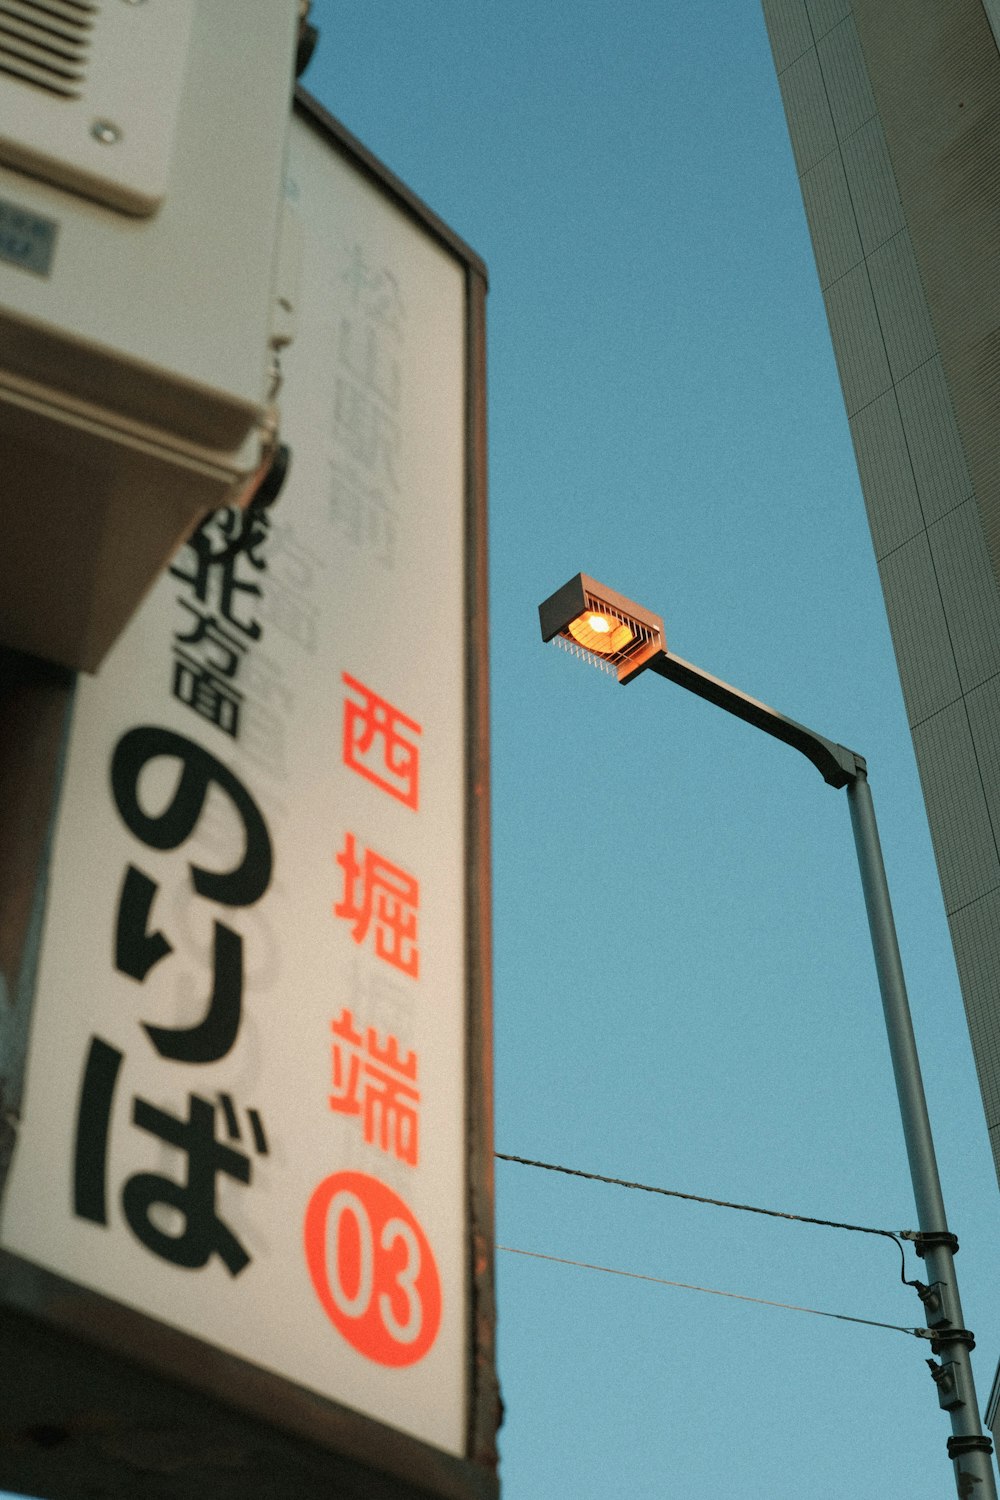 a street light on a pole in front of a building